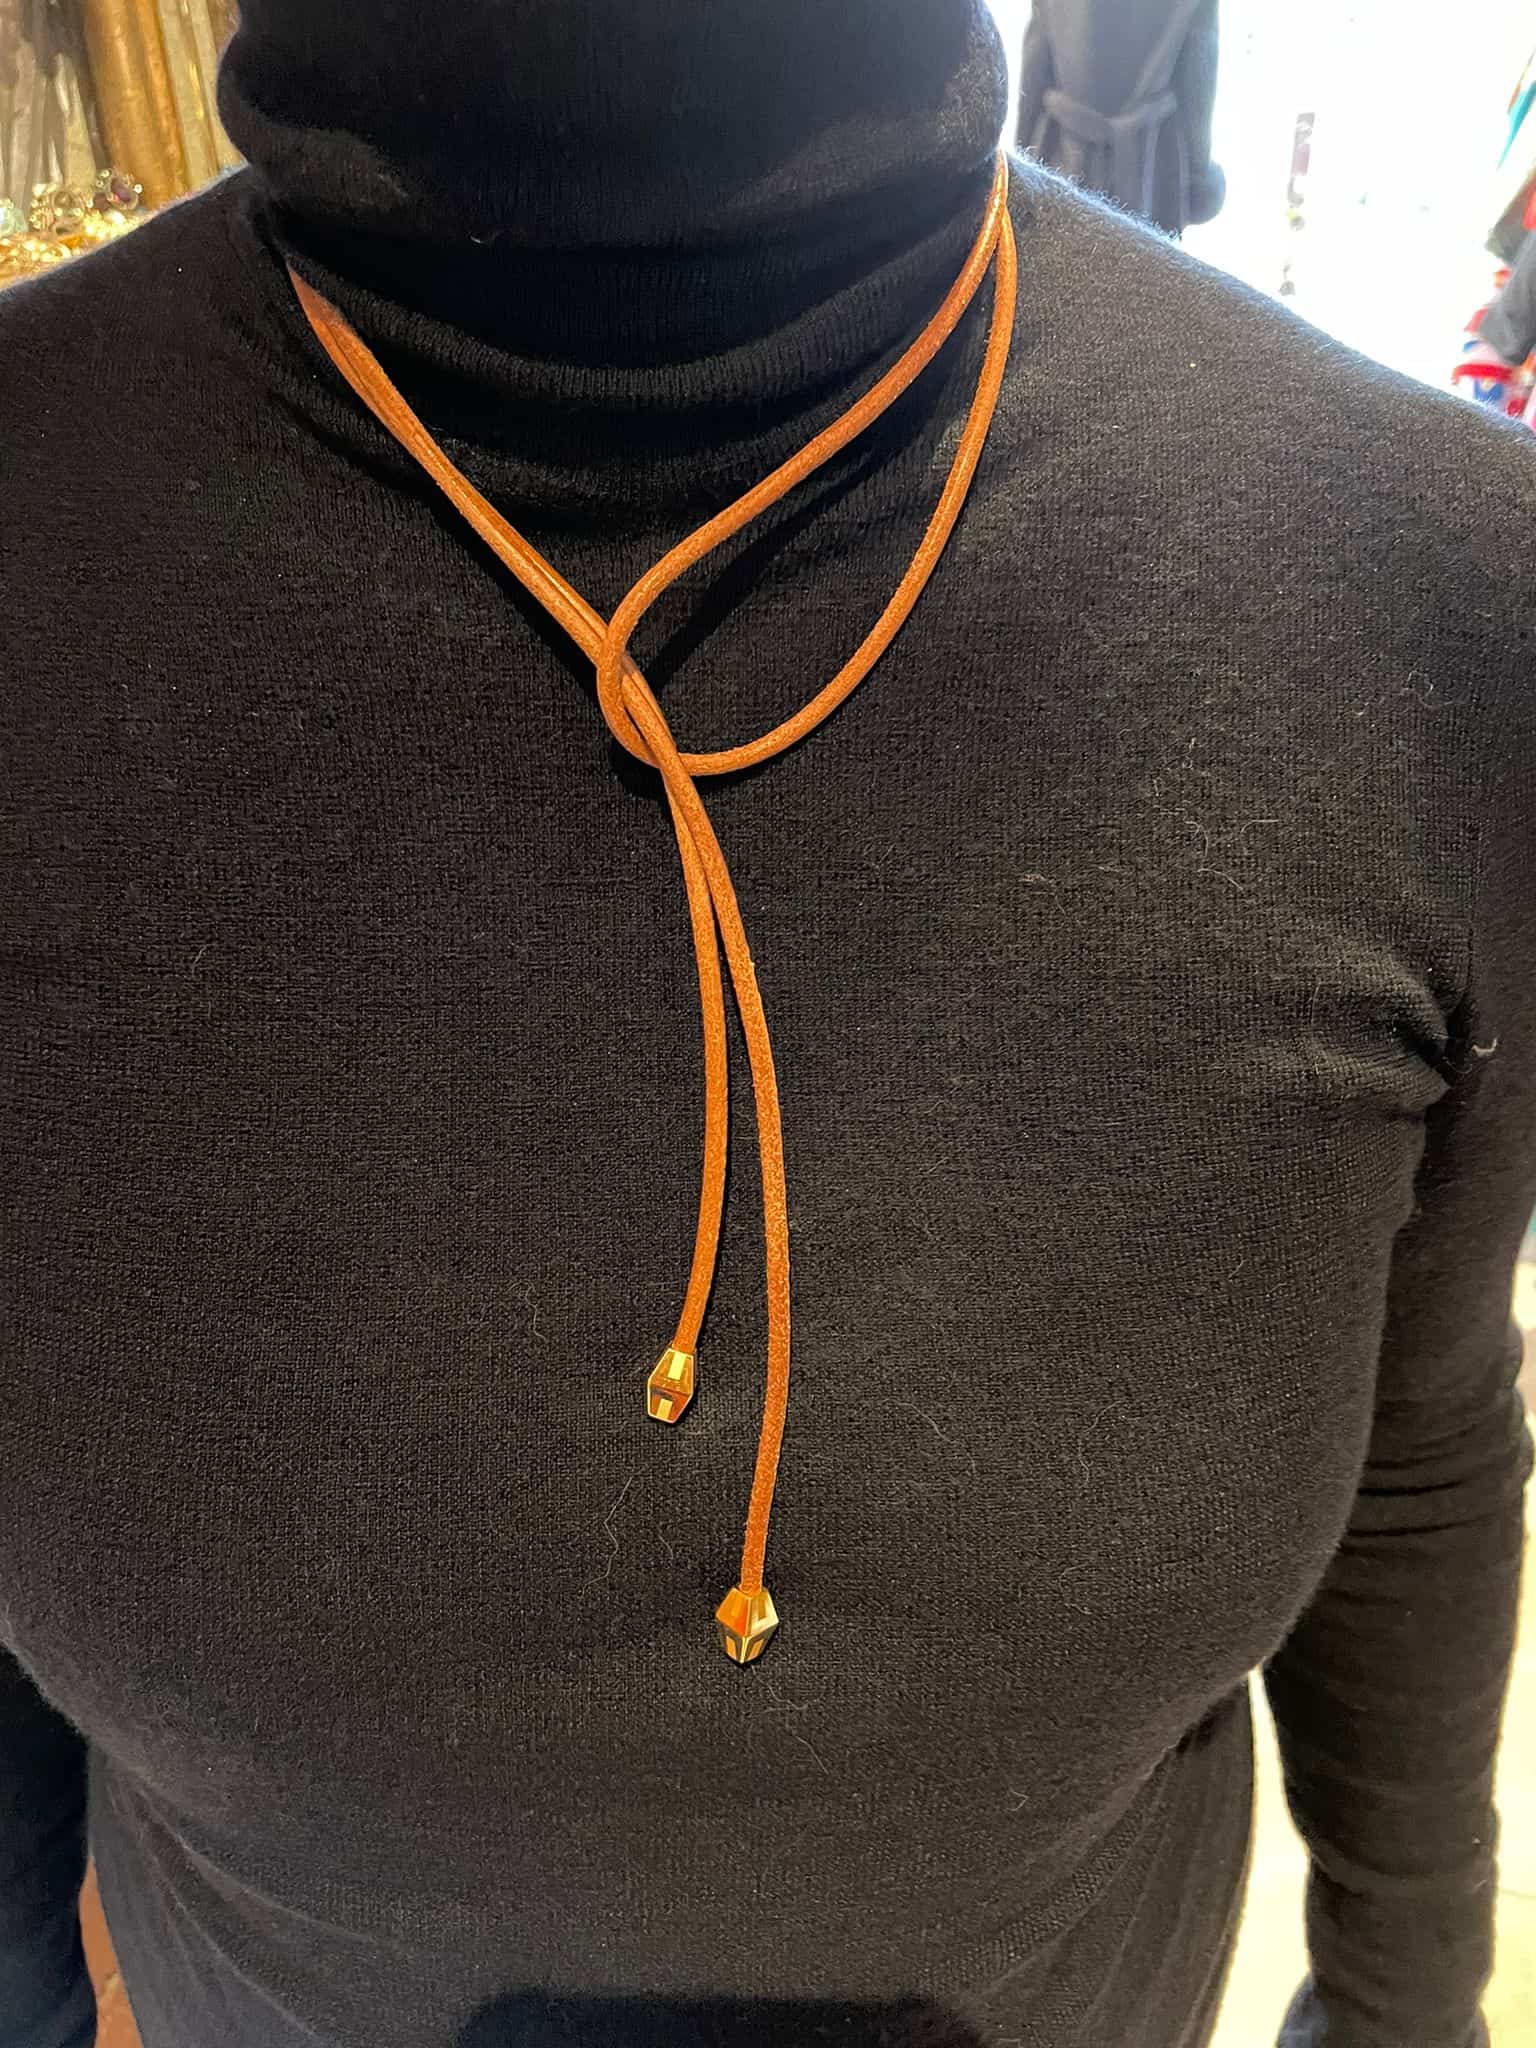 Hermes necklace/belt in gold leather with gold hardware